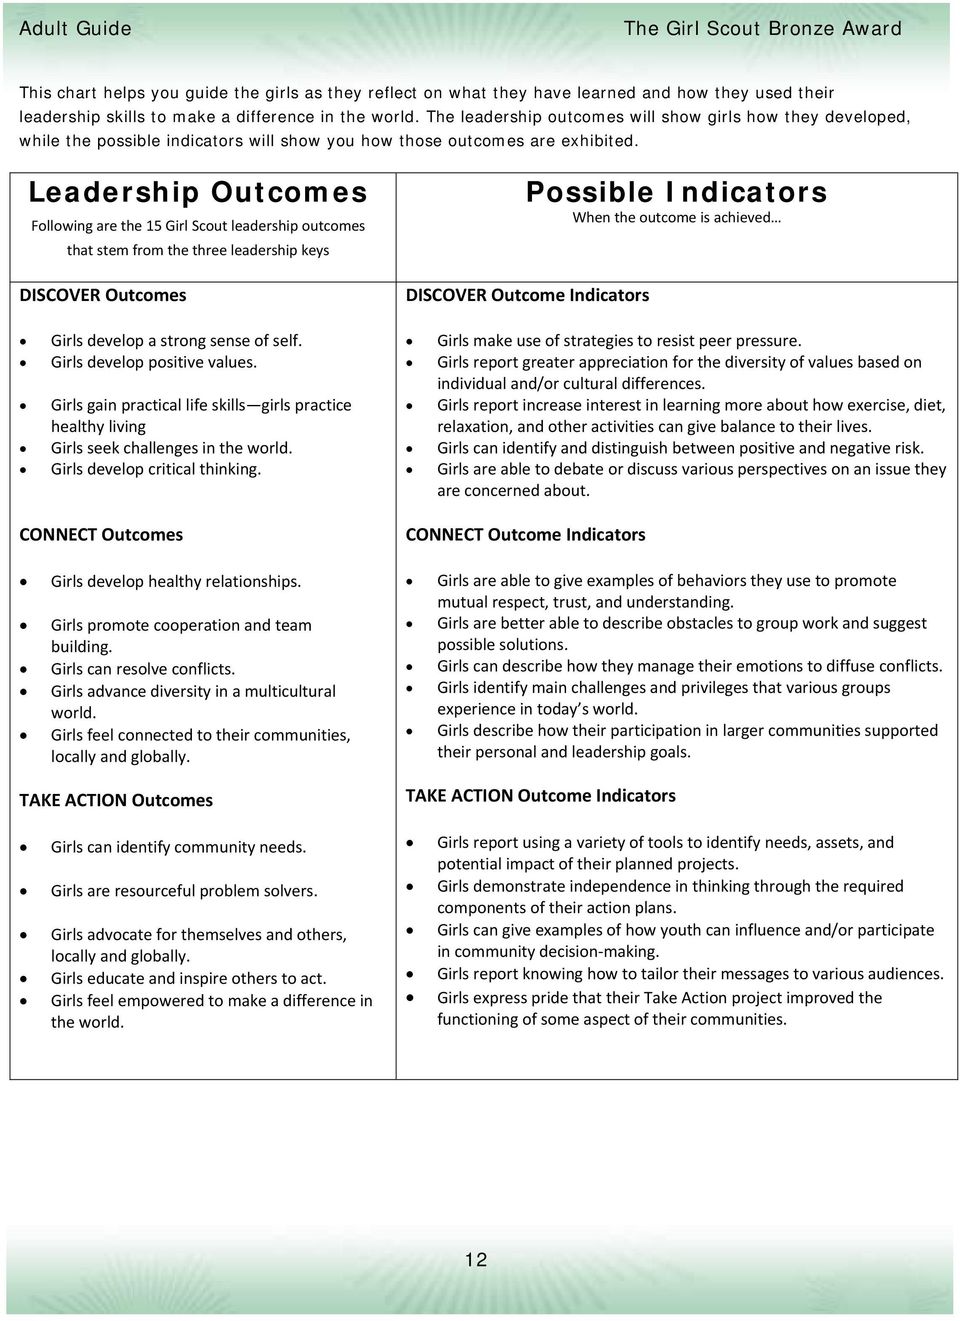 Leadership Outcomes Following are the 15 Girl Scout leadership outcomes that stem from the three leadership keys DISCOVER Outcomes Possible Indicators When the outcome is achieved DISCOVER Outcome